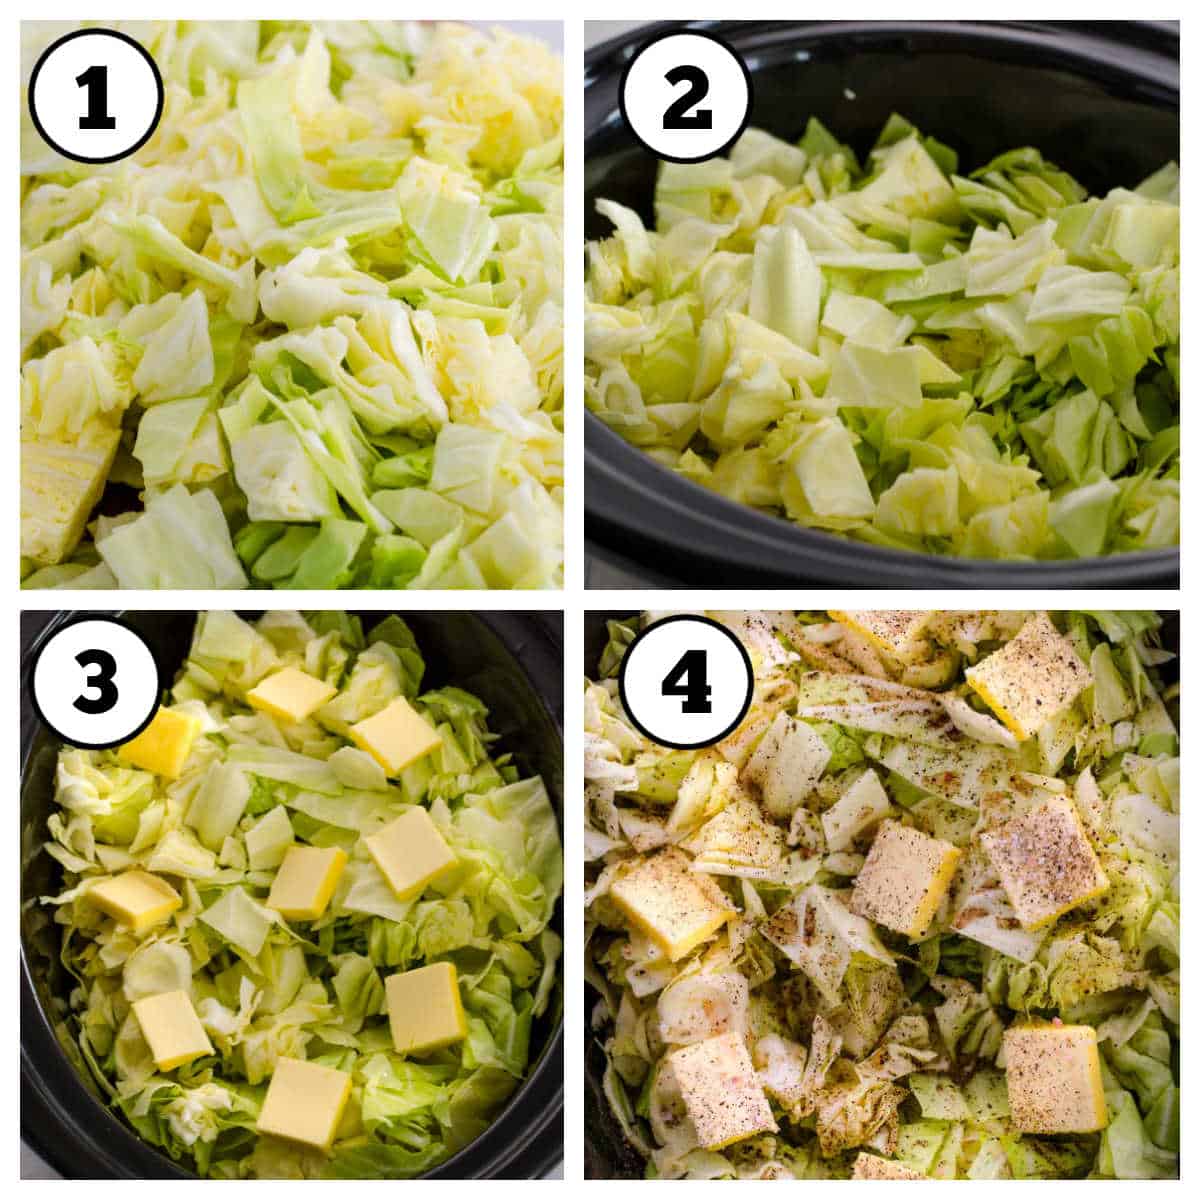 Steps 1-4 of making slow cooker cabbage.